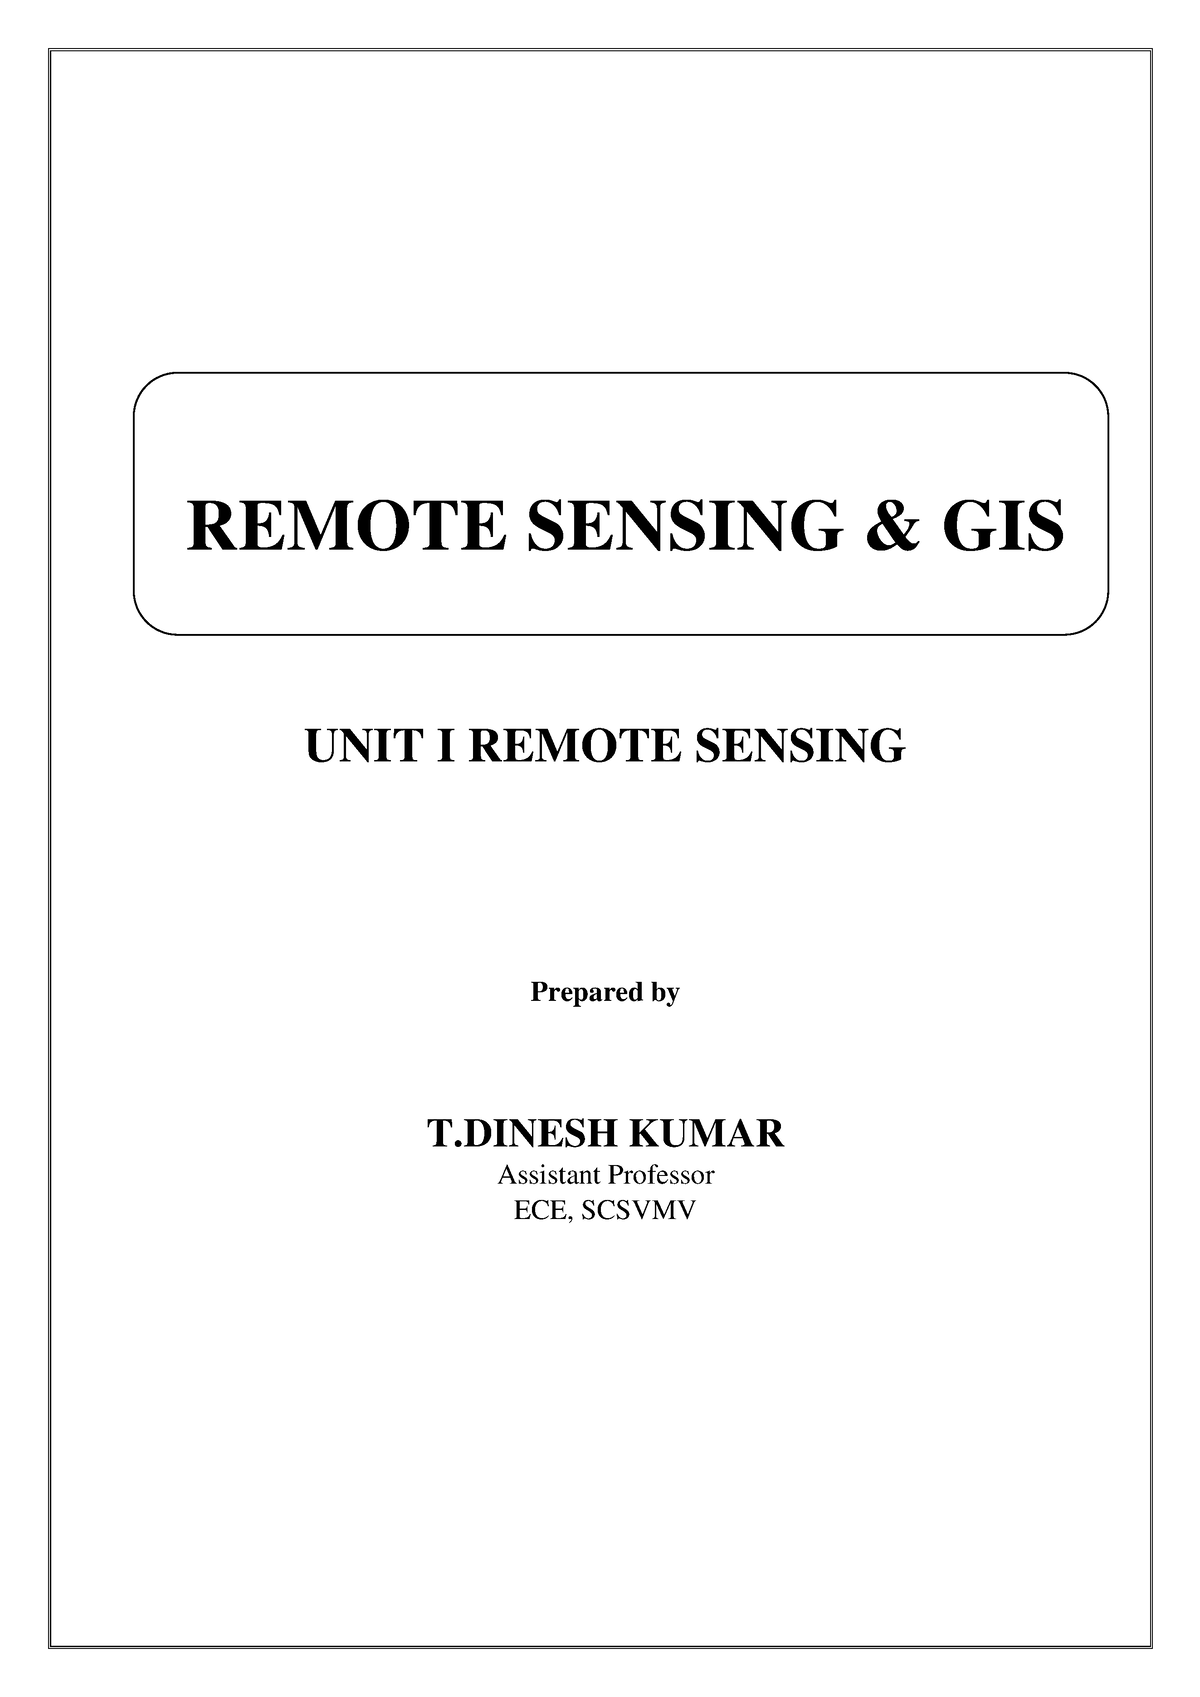 thesis on remote sensing and gis